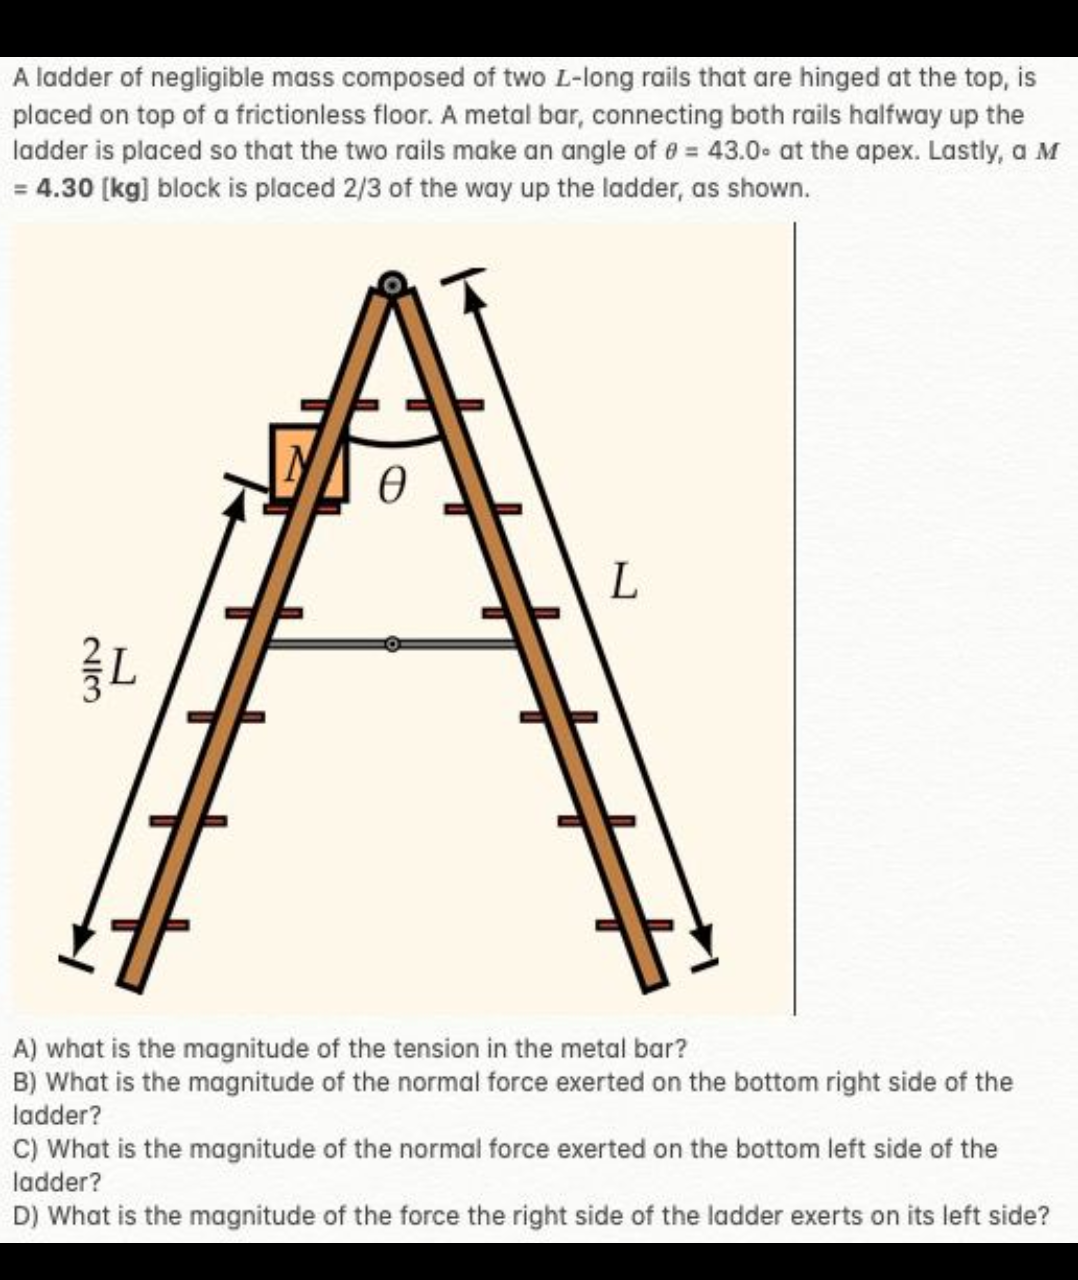 A ladder of negligible mass composed of two L-long rails that are hinged at the top, is
placed on top of a frictionless floor. A metal bar, connecting both rails halfway up the
ladder is placed so that the two rails make an angle of 0 = 43.0 at the apex. Lastly, a M
= 4.30 [kg] block is placed 2/3 of the way up the ladder, as shown.
213
L
Ө
L
H
#
A) what is the magnitude of the tension in the metal bar?
B) What is the magnitude of the normal force exerted on the bottom right side of the
ladder?
C) What is the magnitude of the normal force exerted on the bottom left side of the
ladder?
D) What is the magnitude of the force the right side of the ladder exerts on its left side?